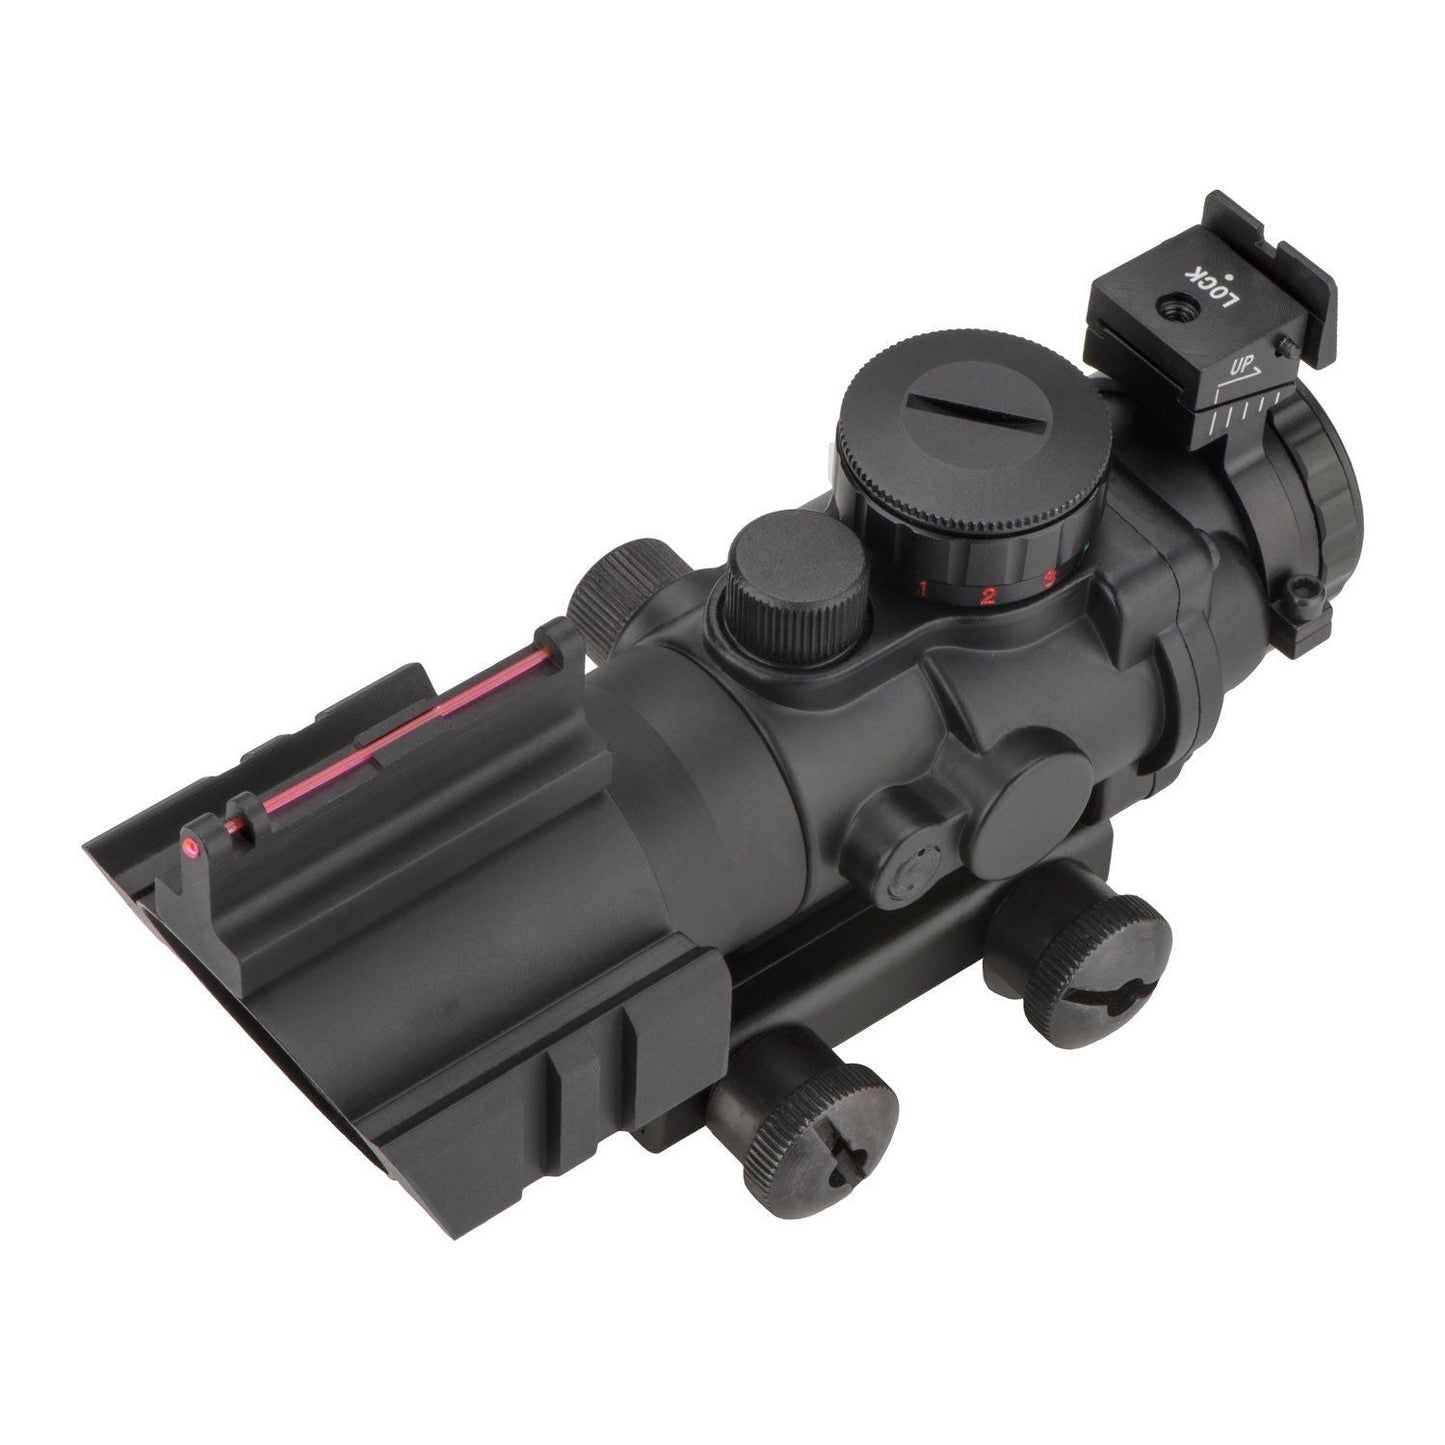 Compact 4x32 Illuminated Reticle Optic with Fiber Optic Front Sight